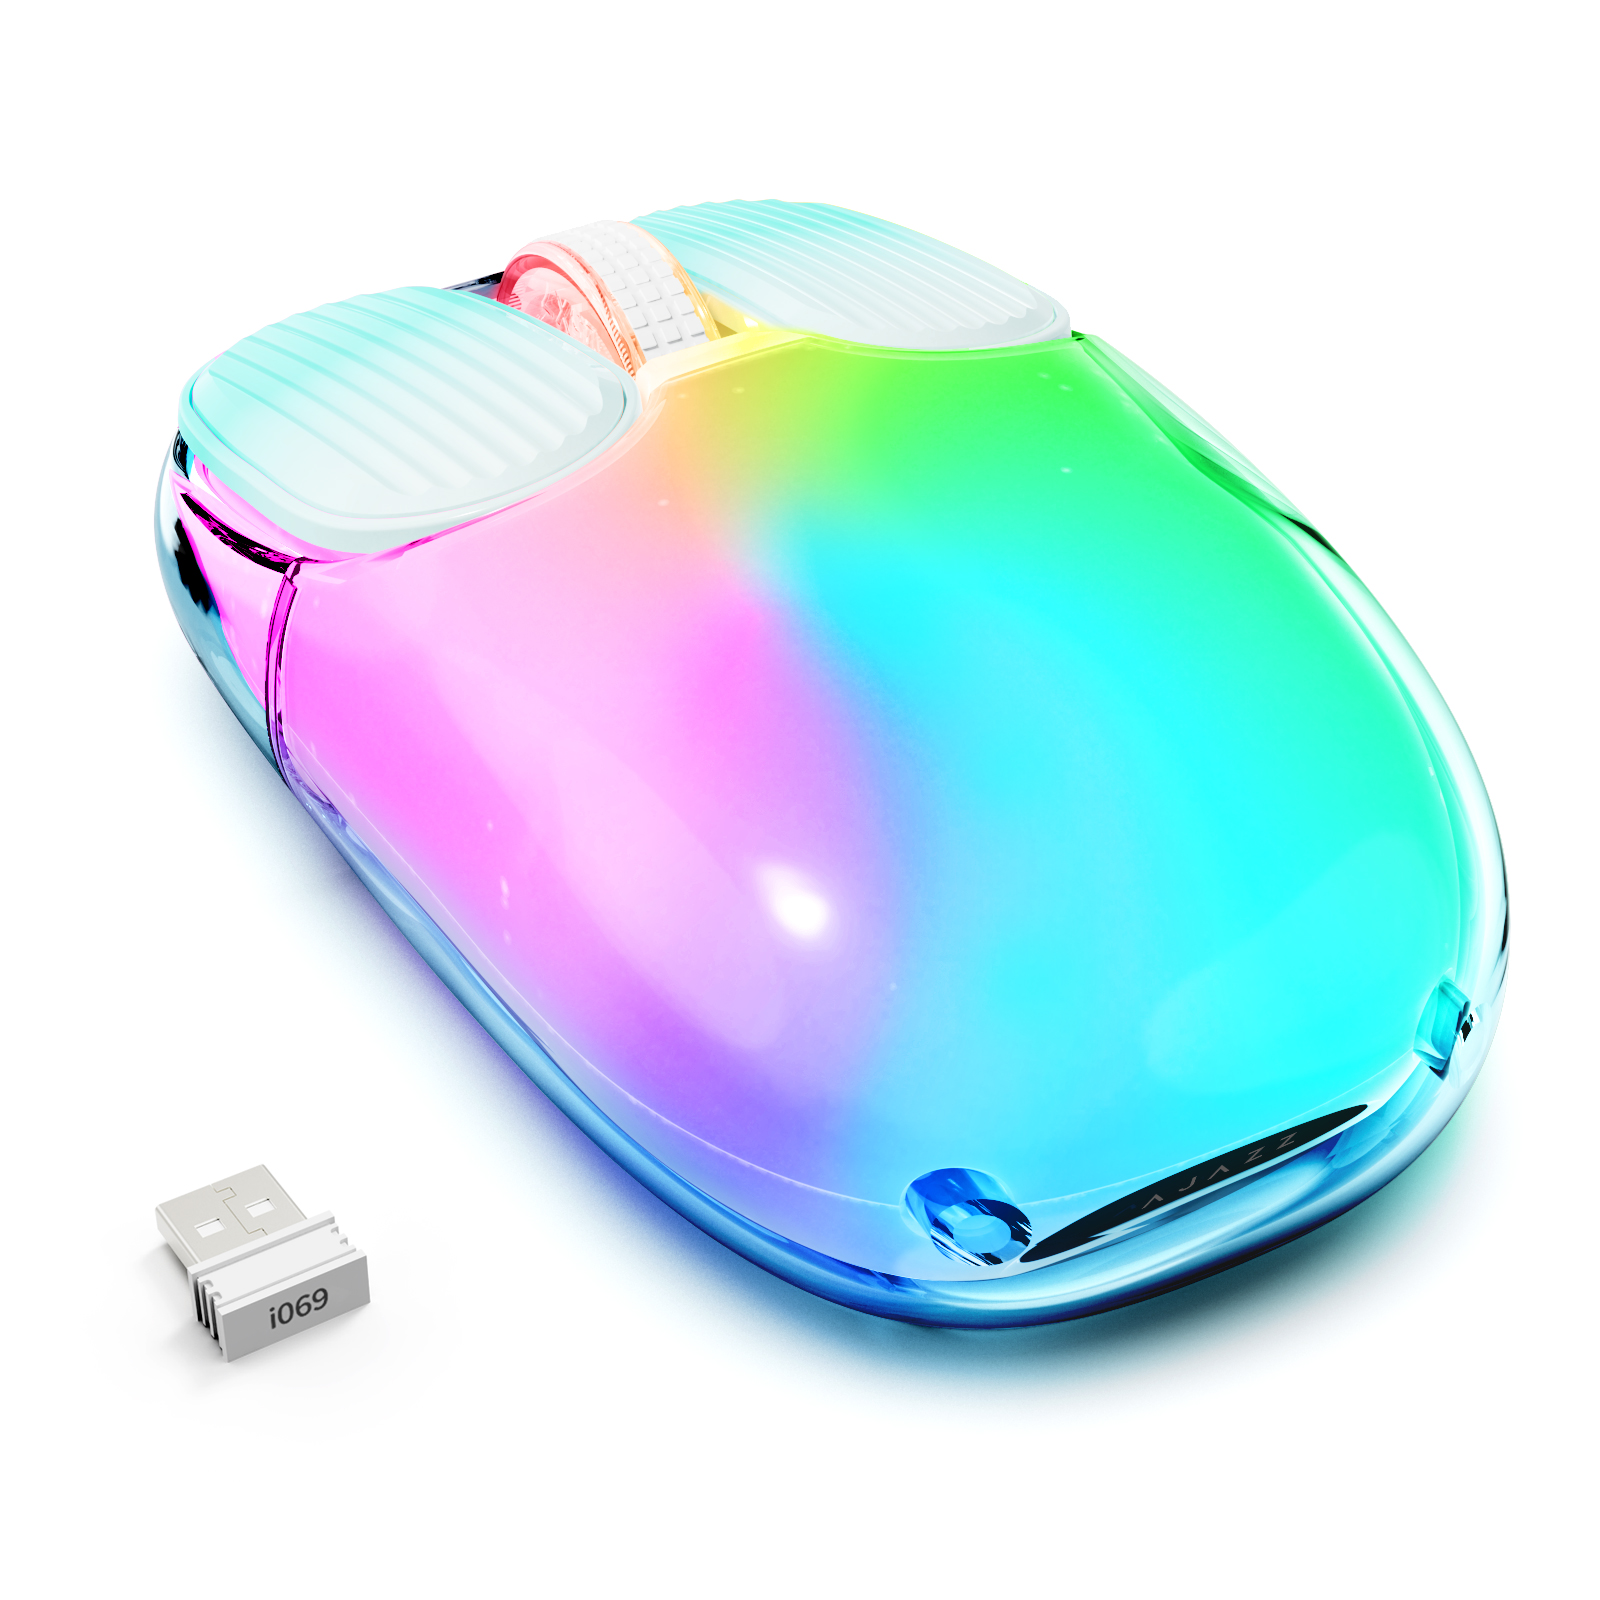 VGN GAMEPOWER I069 Wireless Gaming Mouse, 76g Lightweight RGB Computer ...